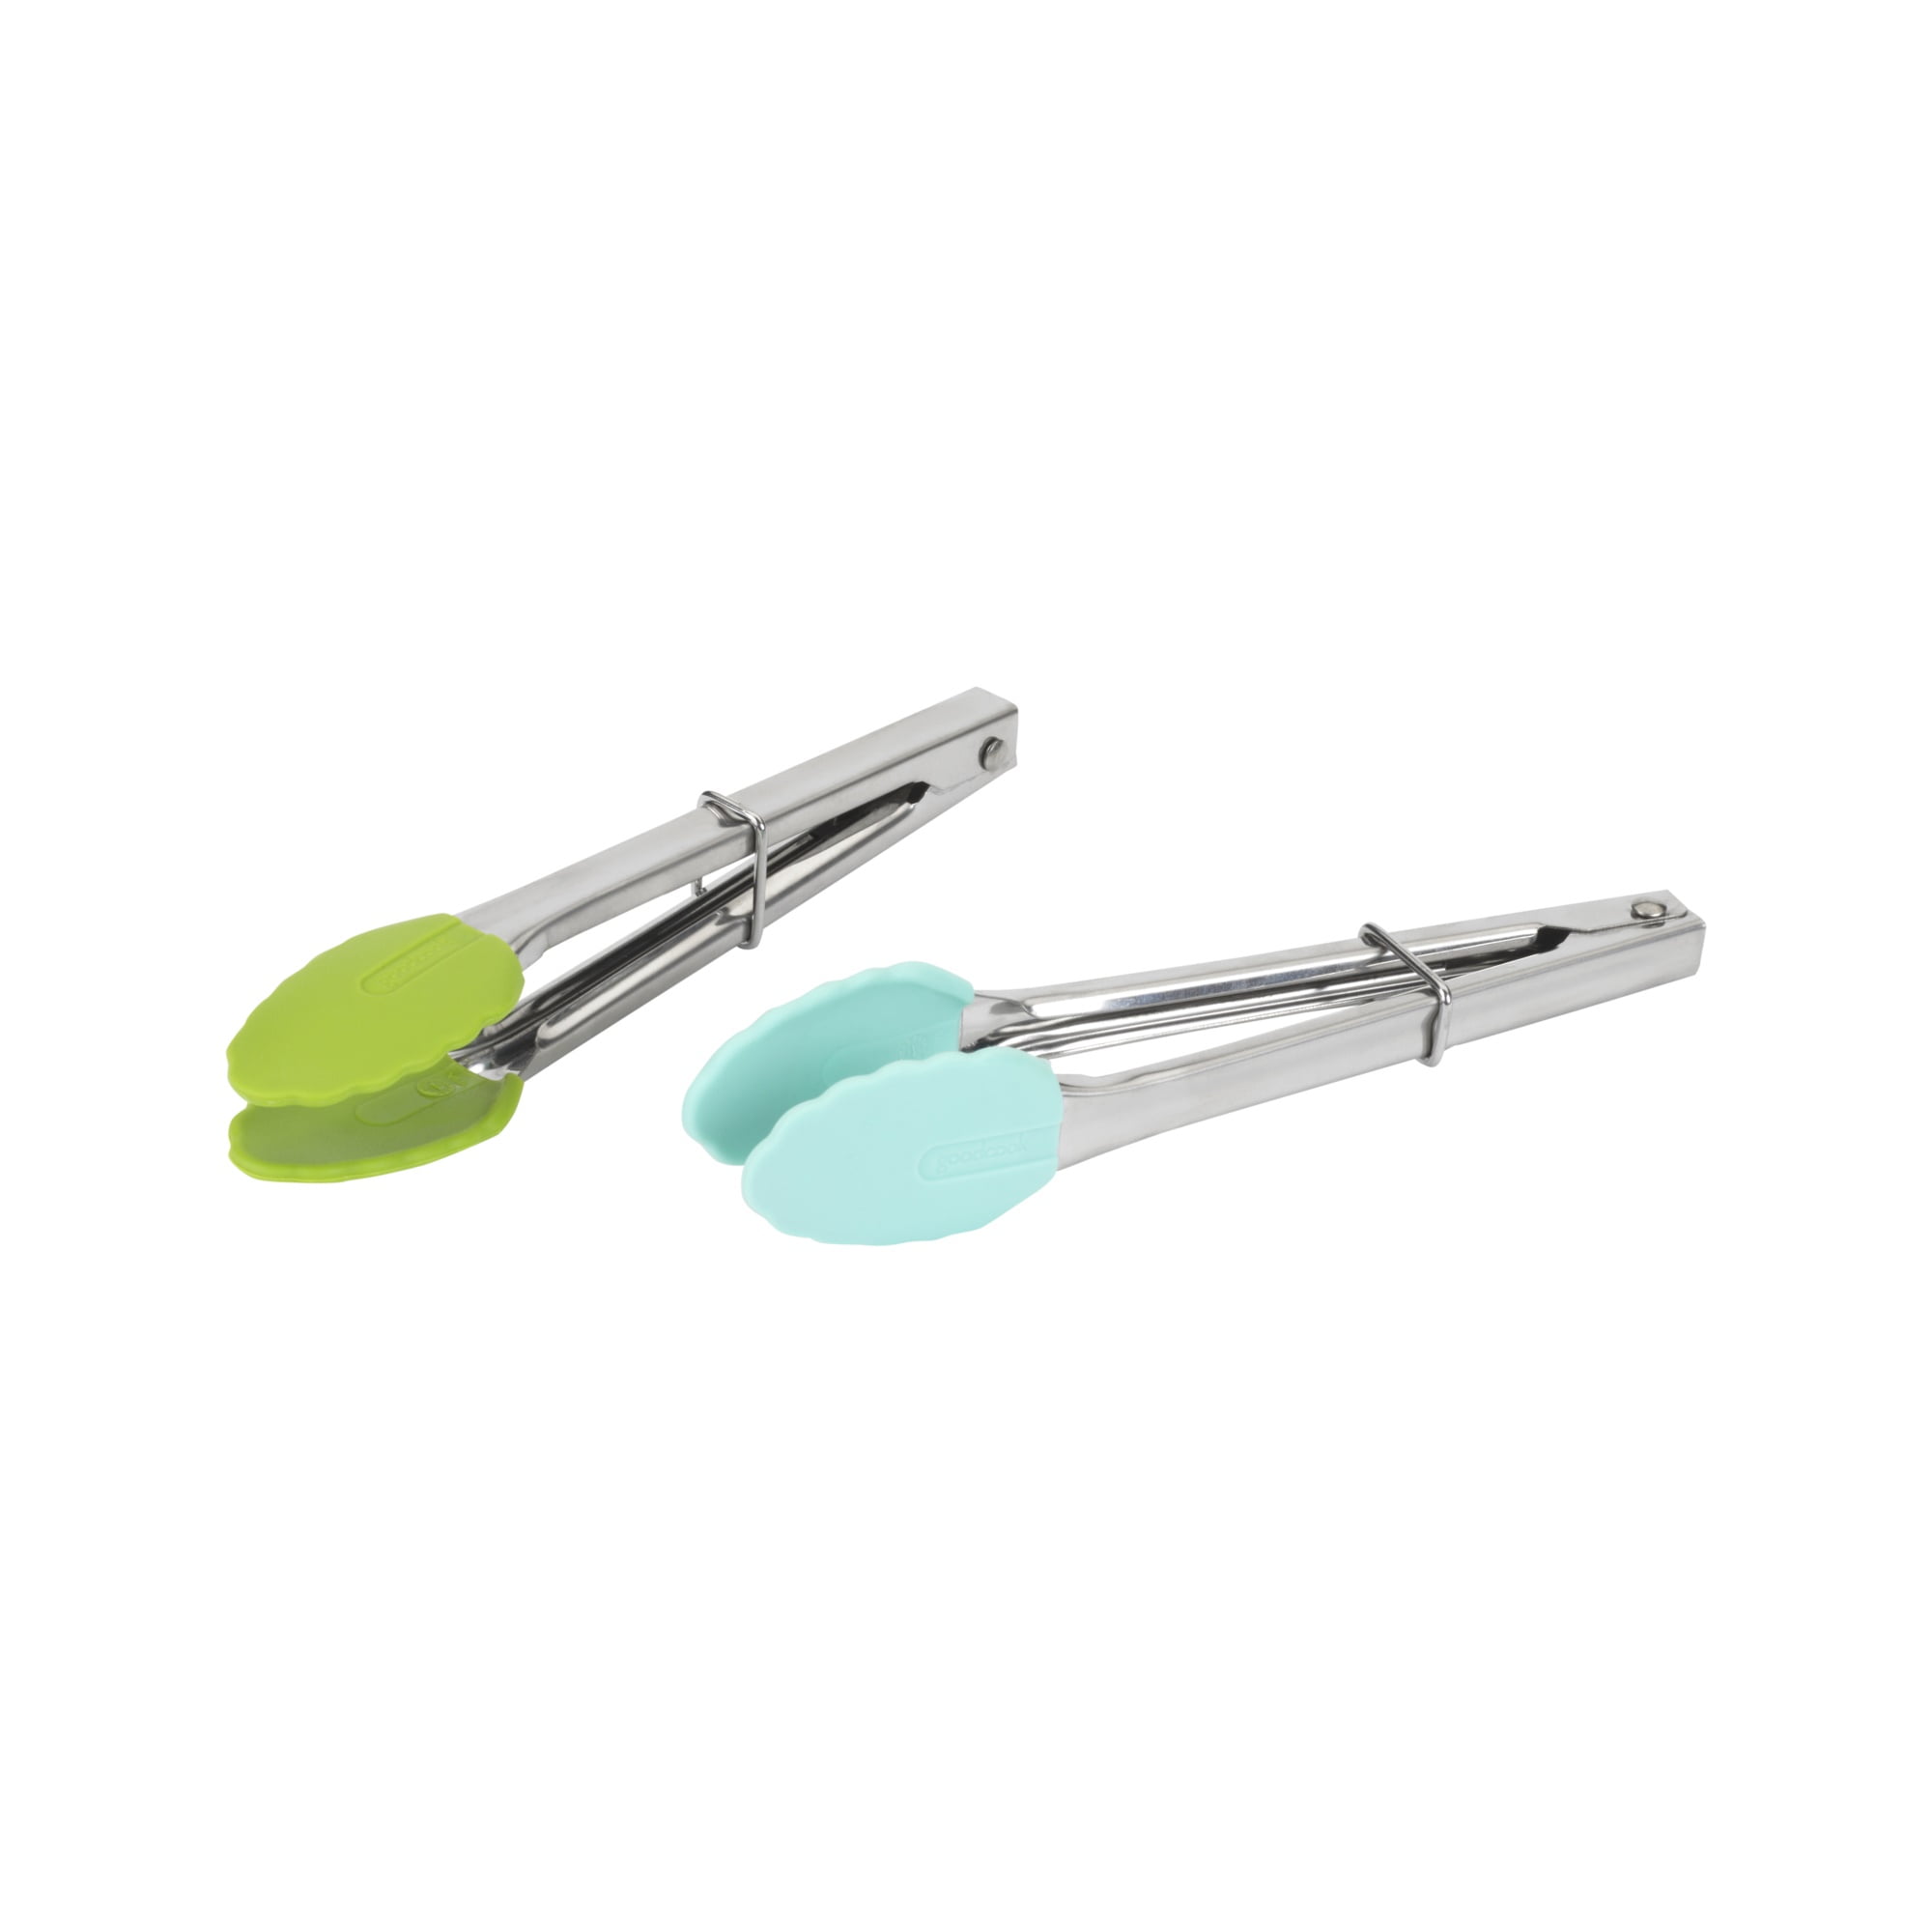  Eddeas Small Tongs For Cooking, Mini 7 inch Kitchen